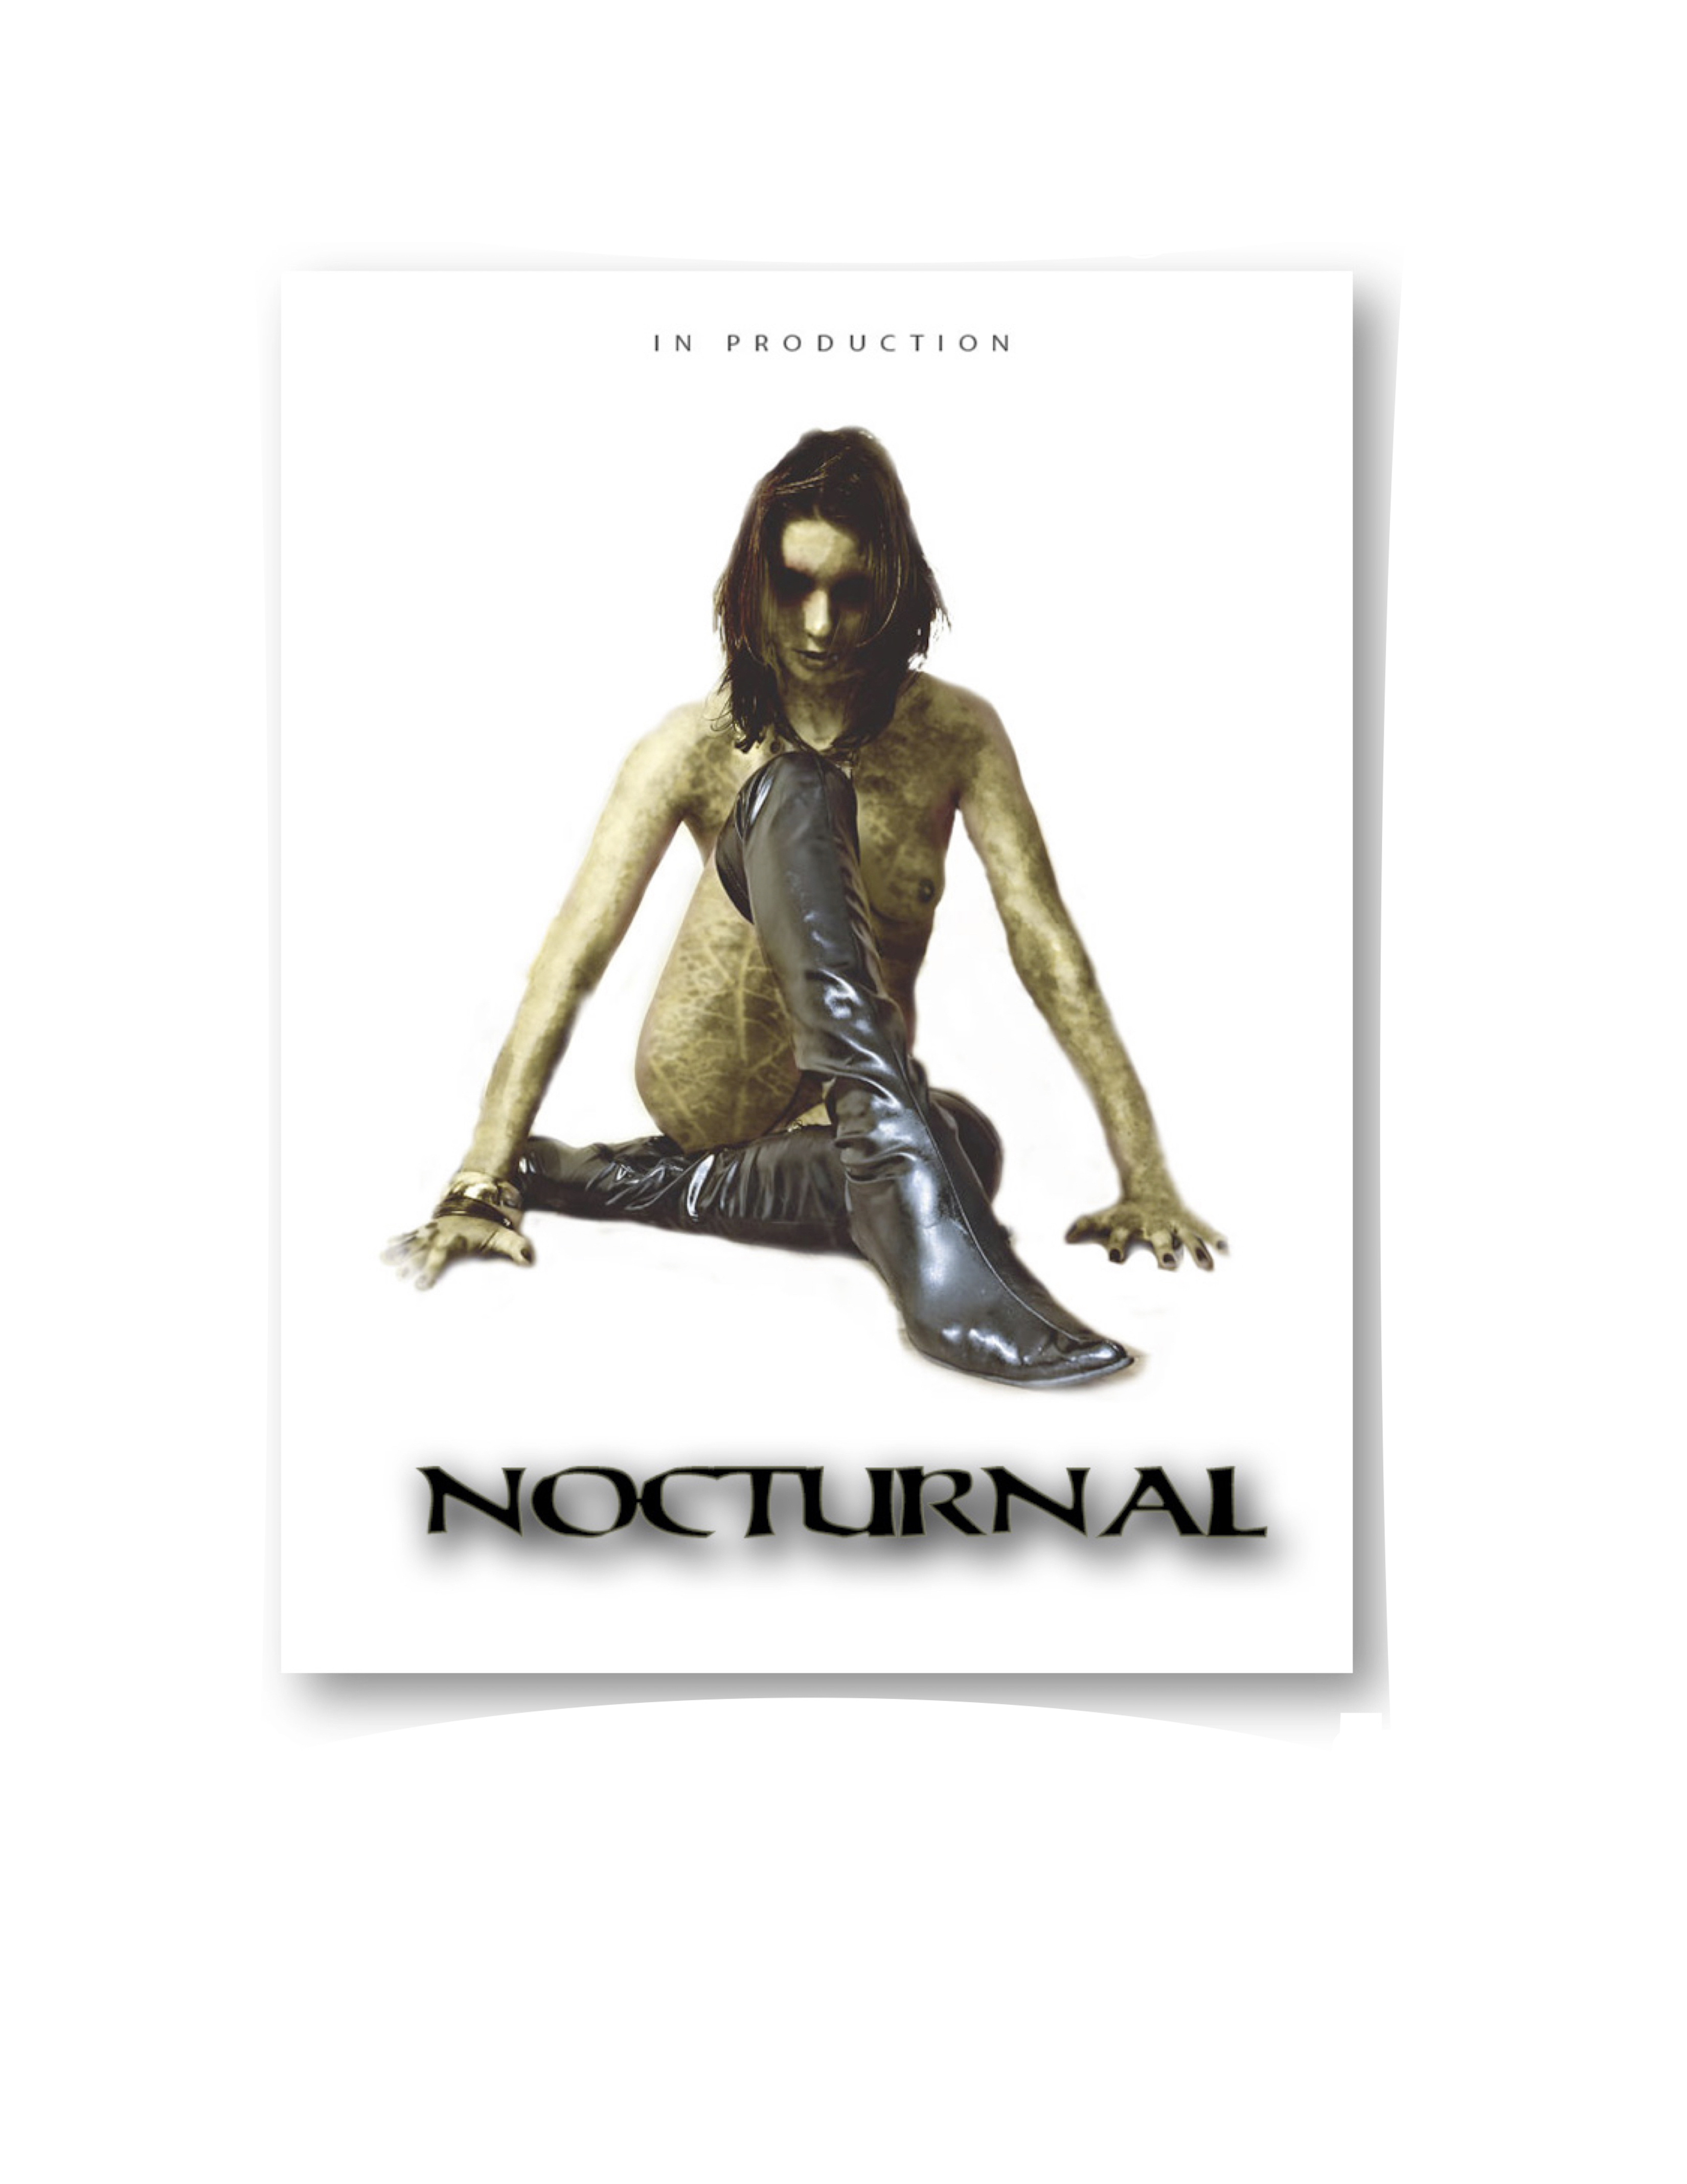 The Nocturnal постер